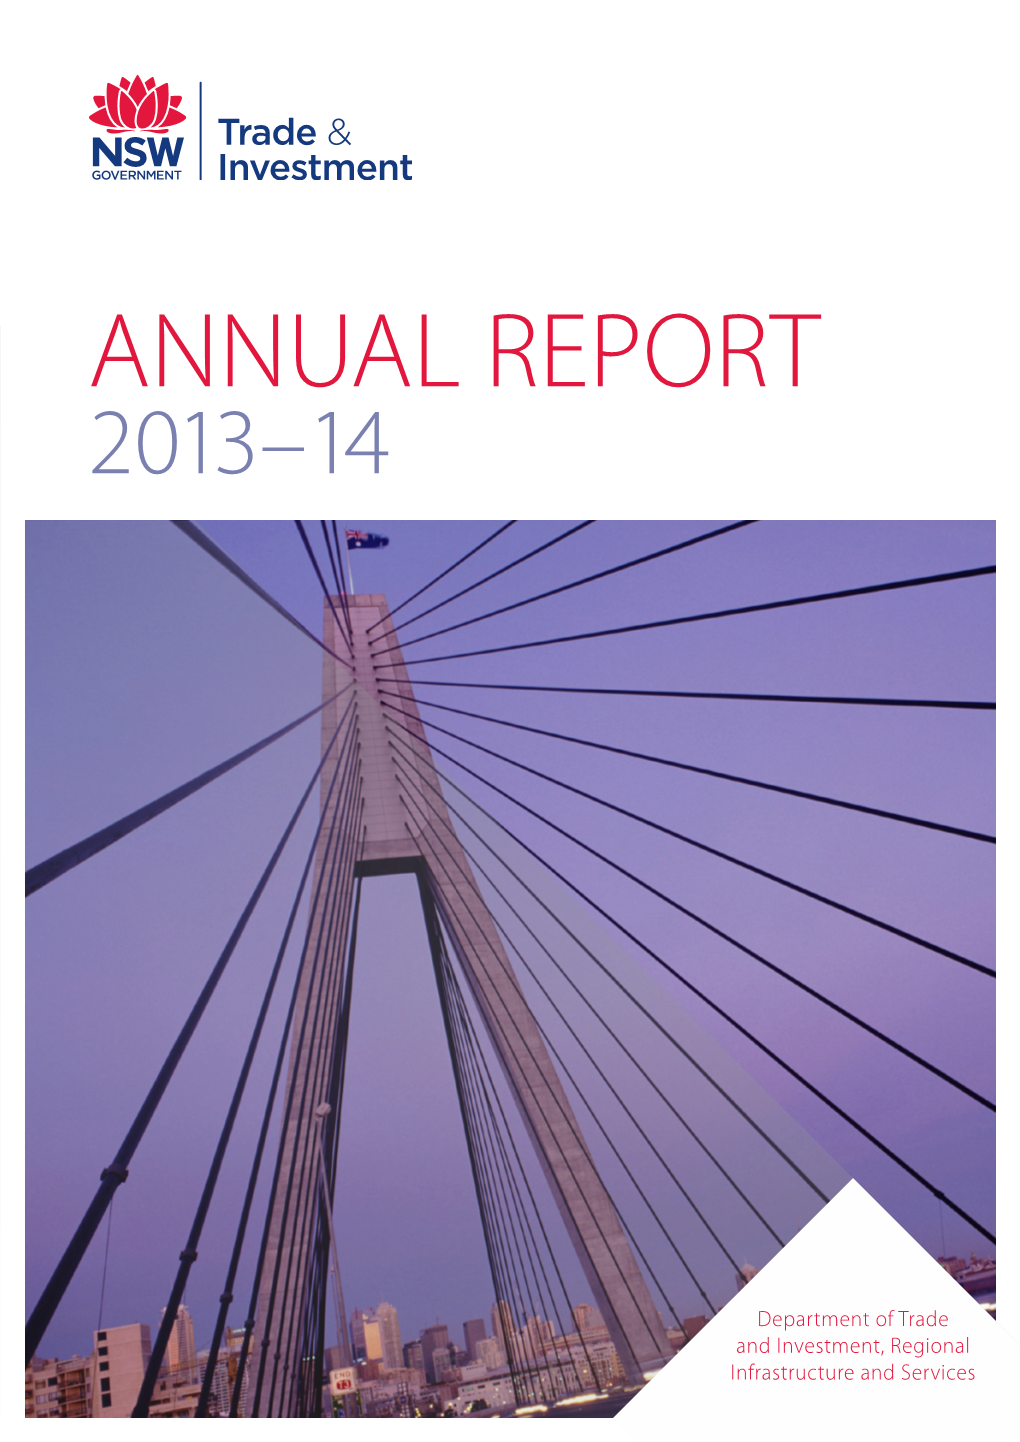 Trade & Investment NSW Annual Report 2013-14